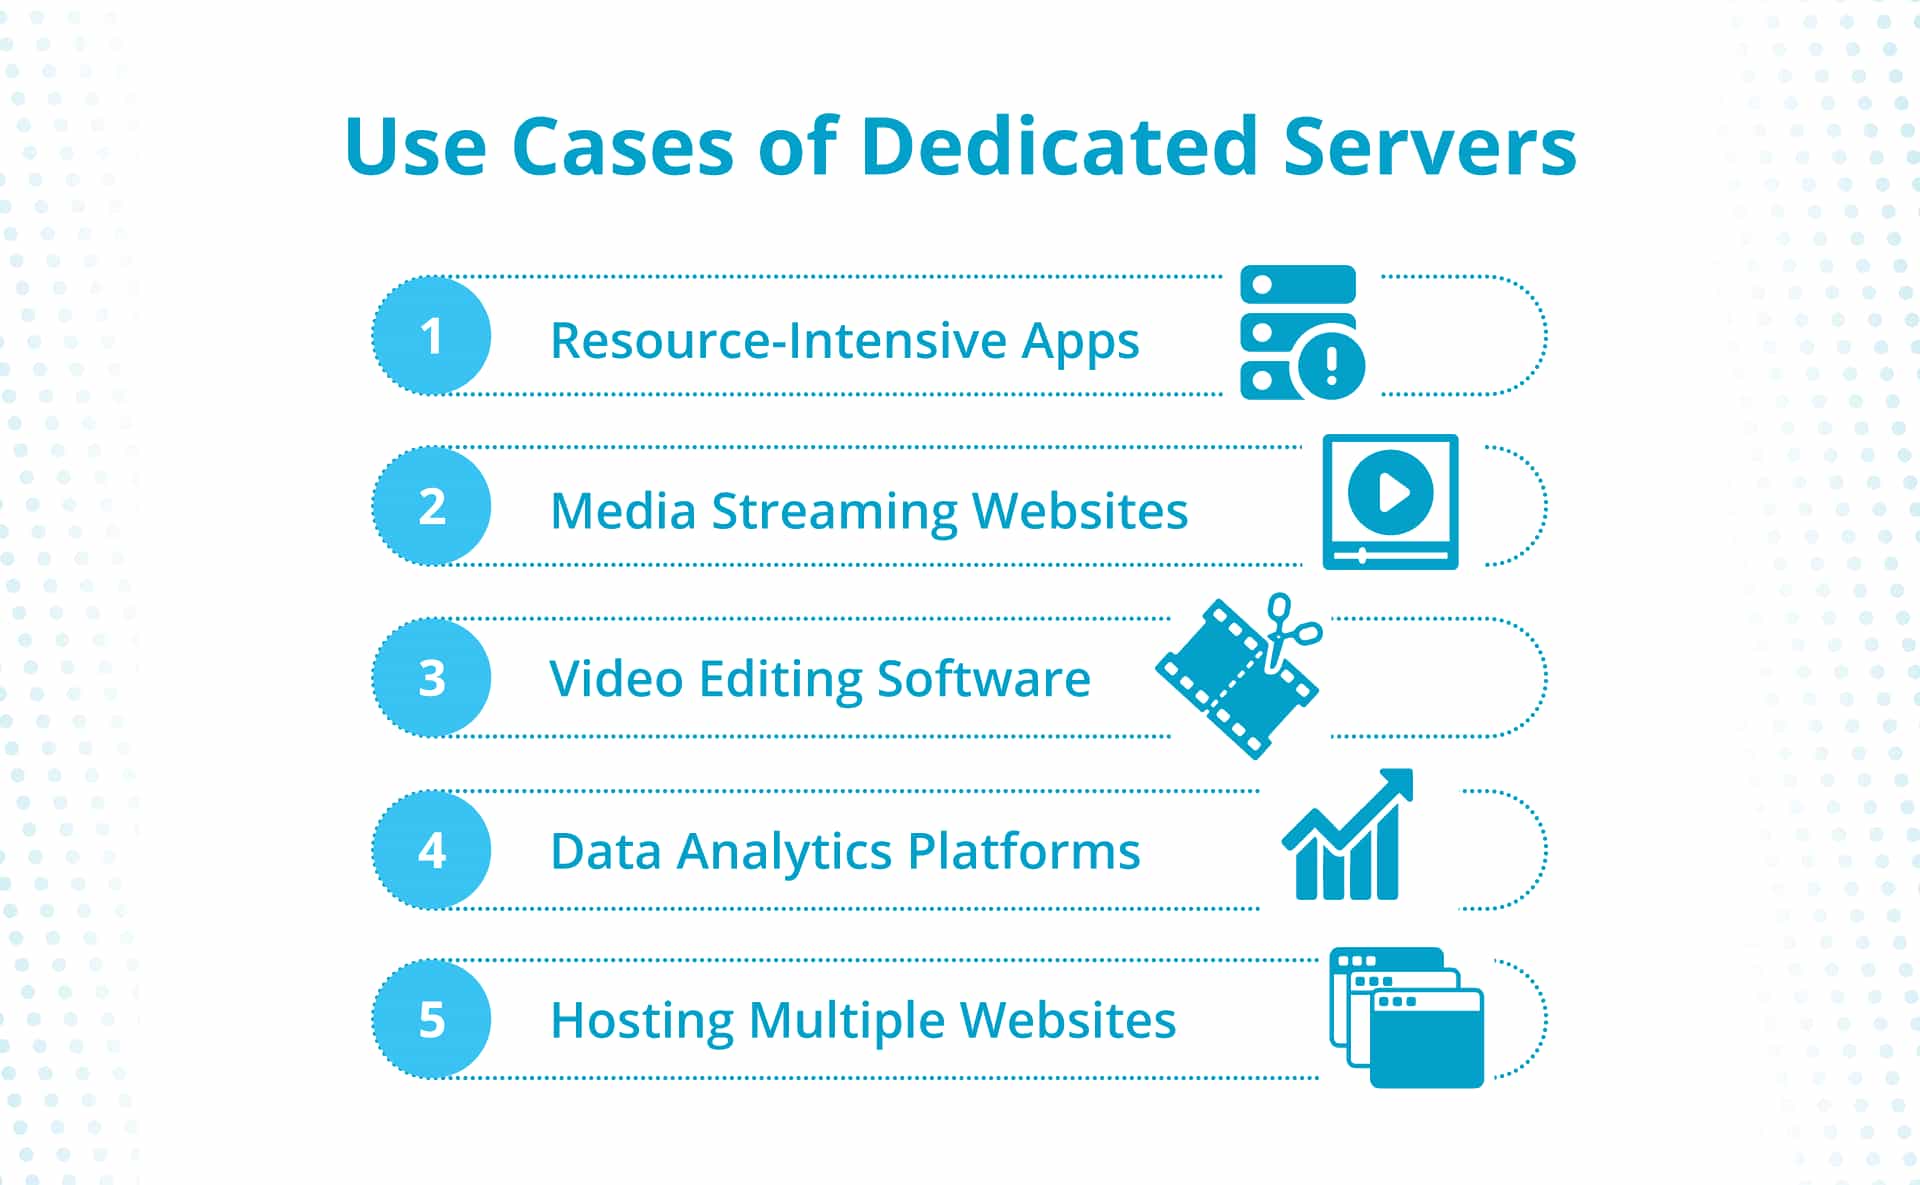 Use cases of dedicated servers.